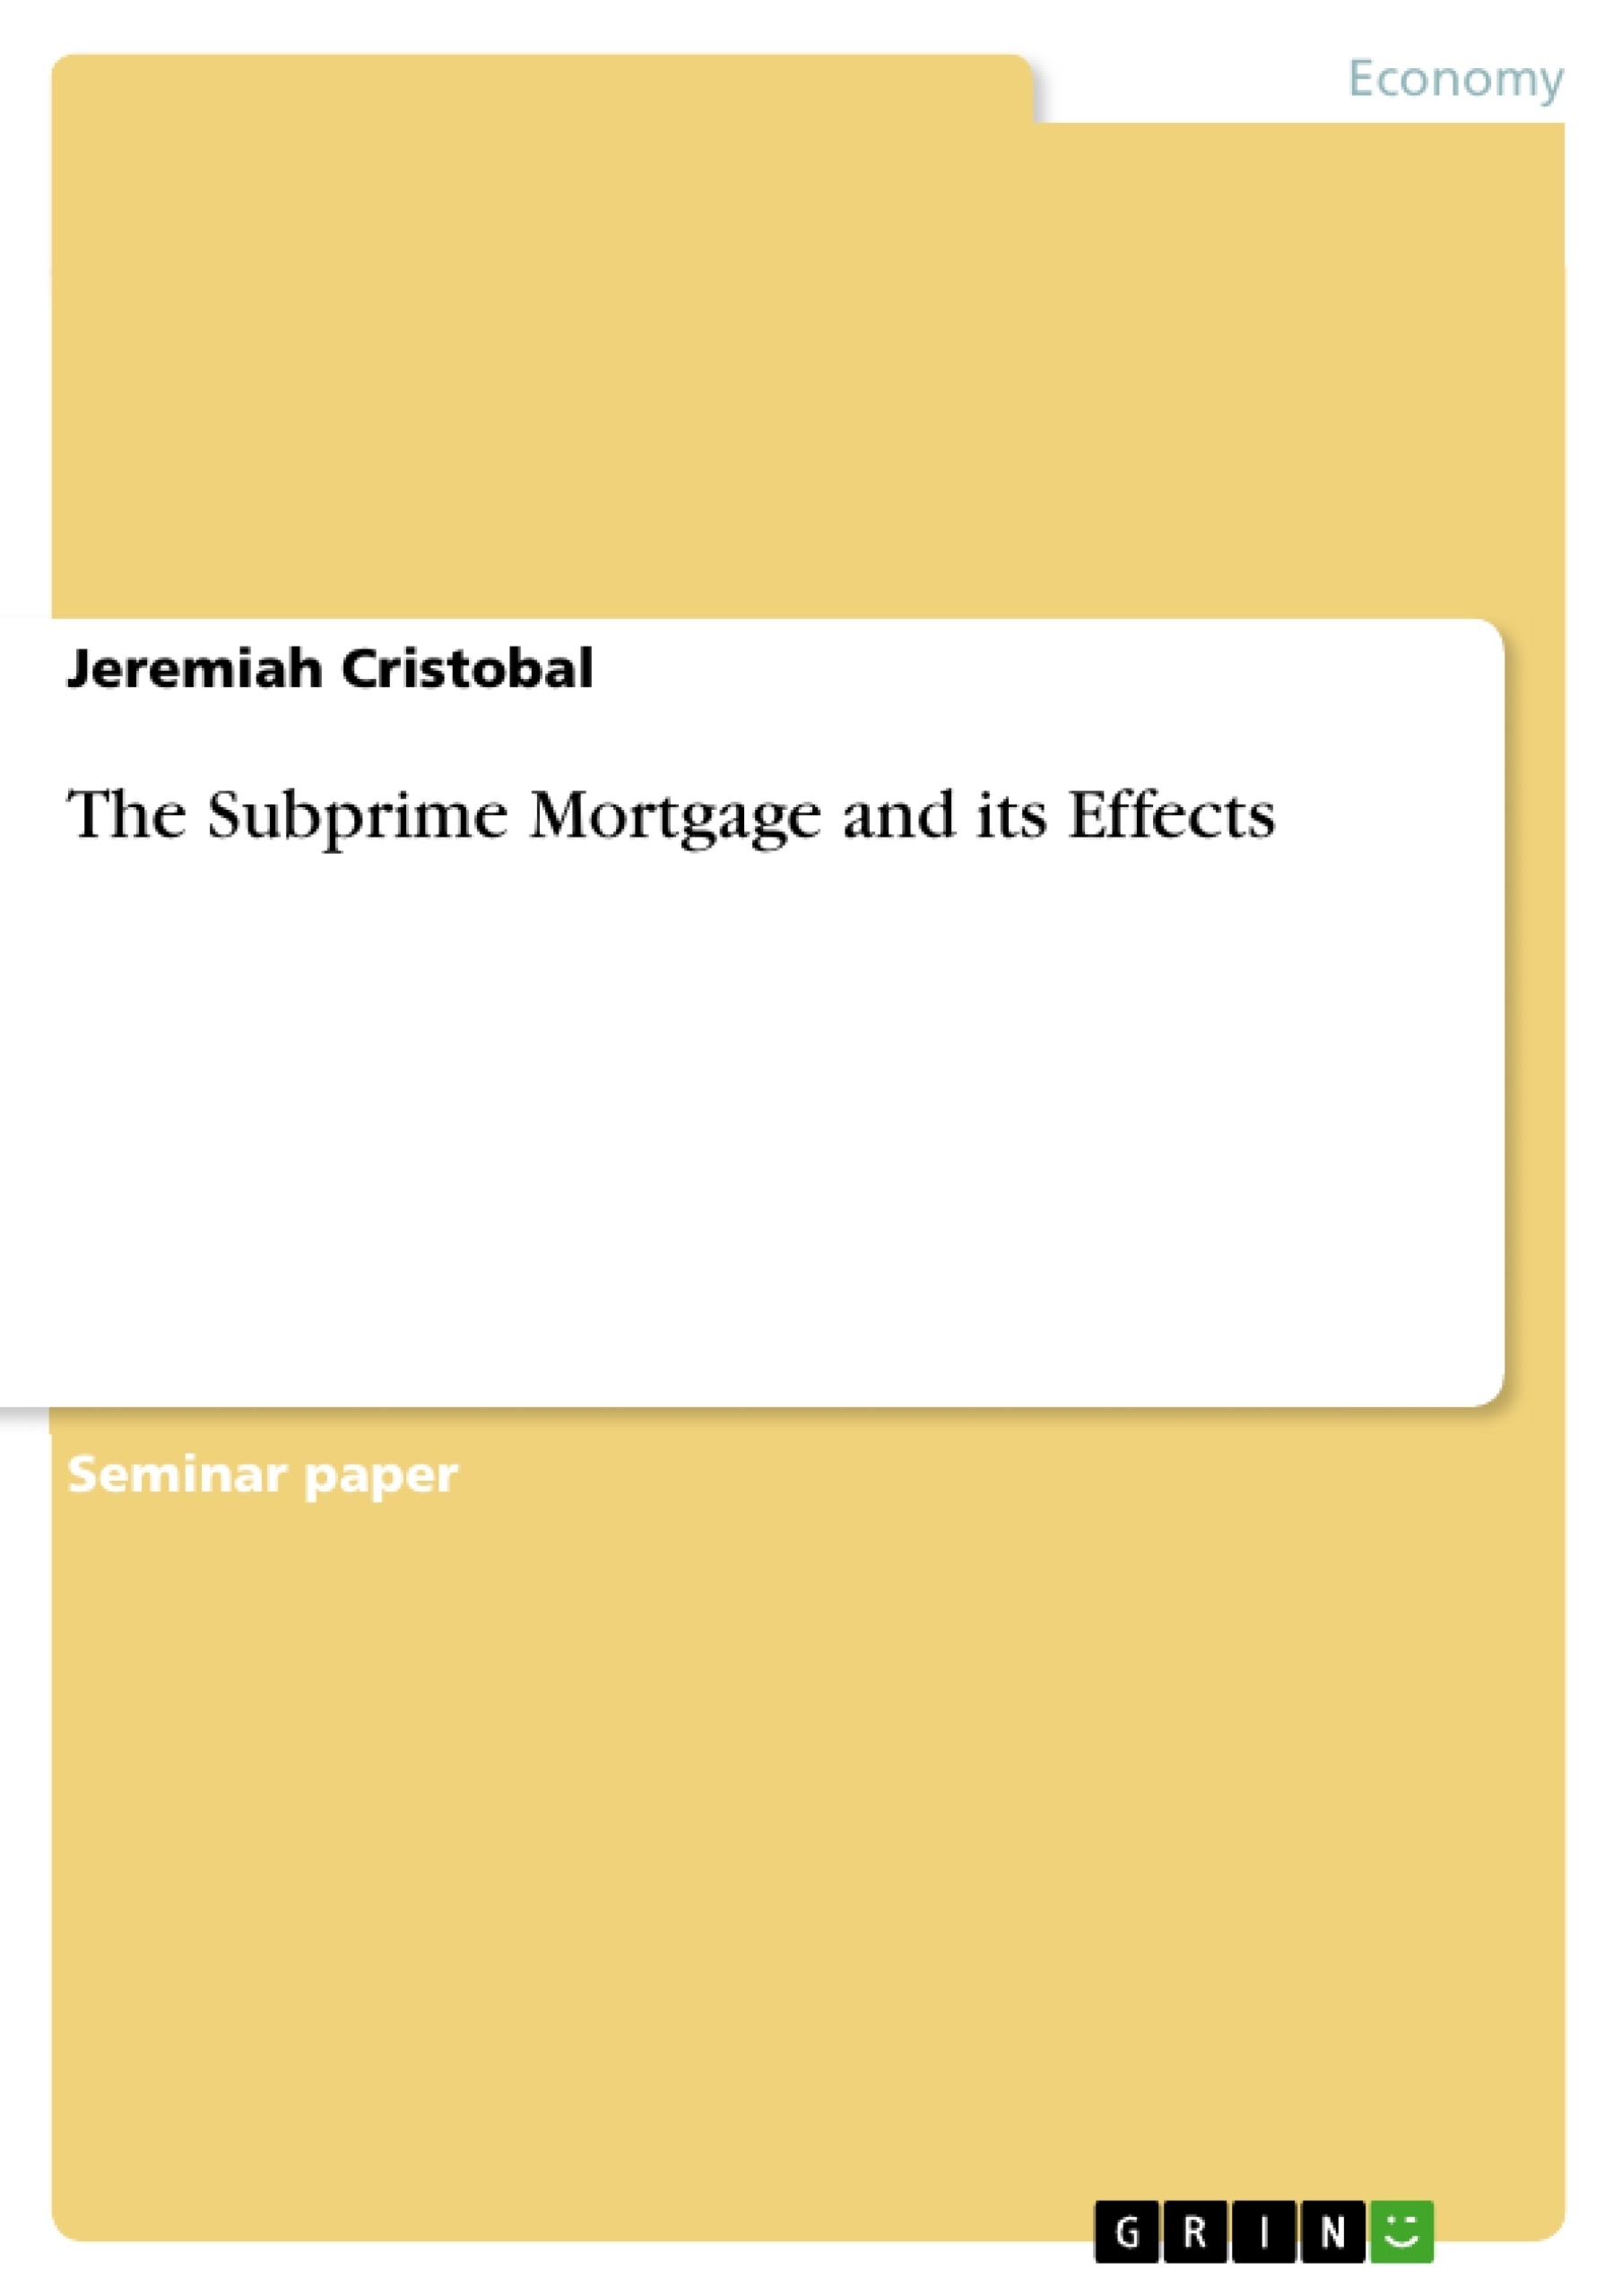 Title: The Subprime Mortgage and its Effects